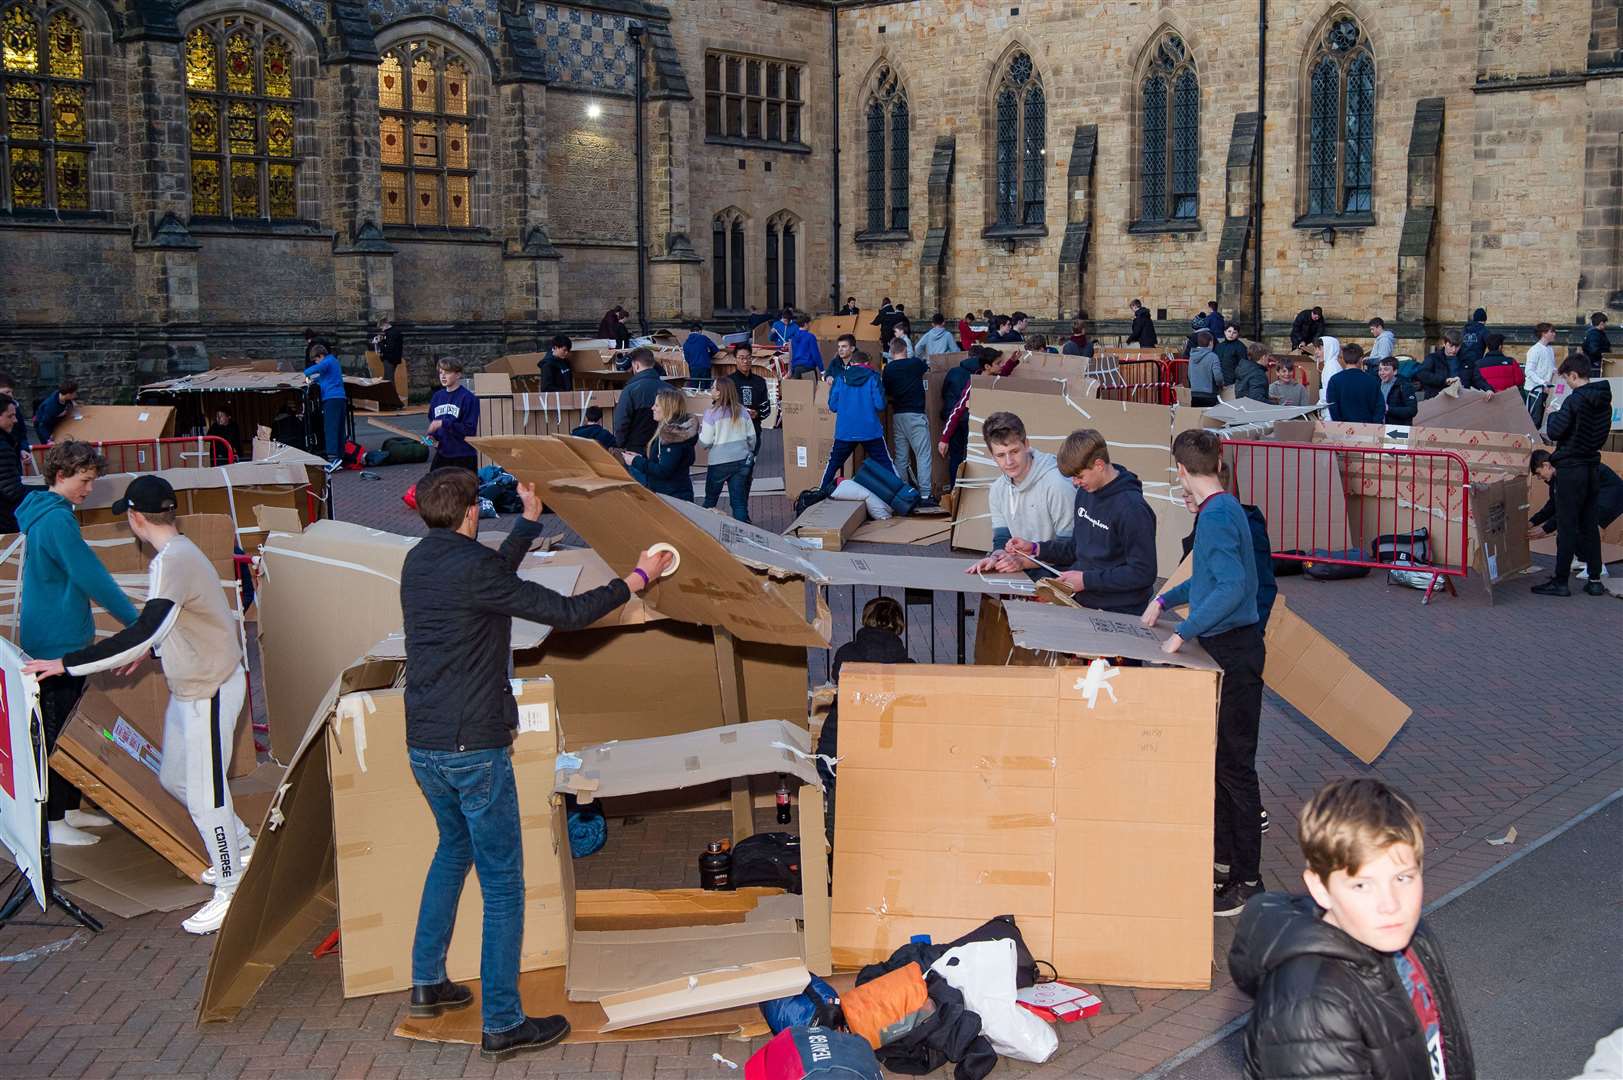 The sleepout took place at the Tonbridge School (9420832)